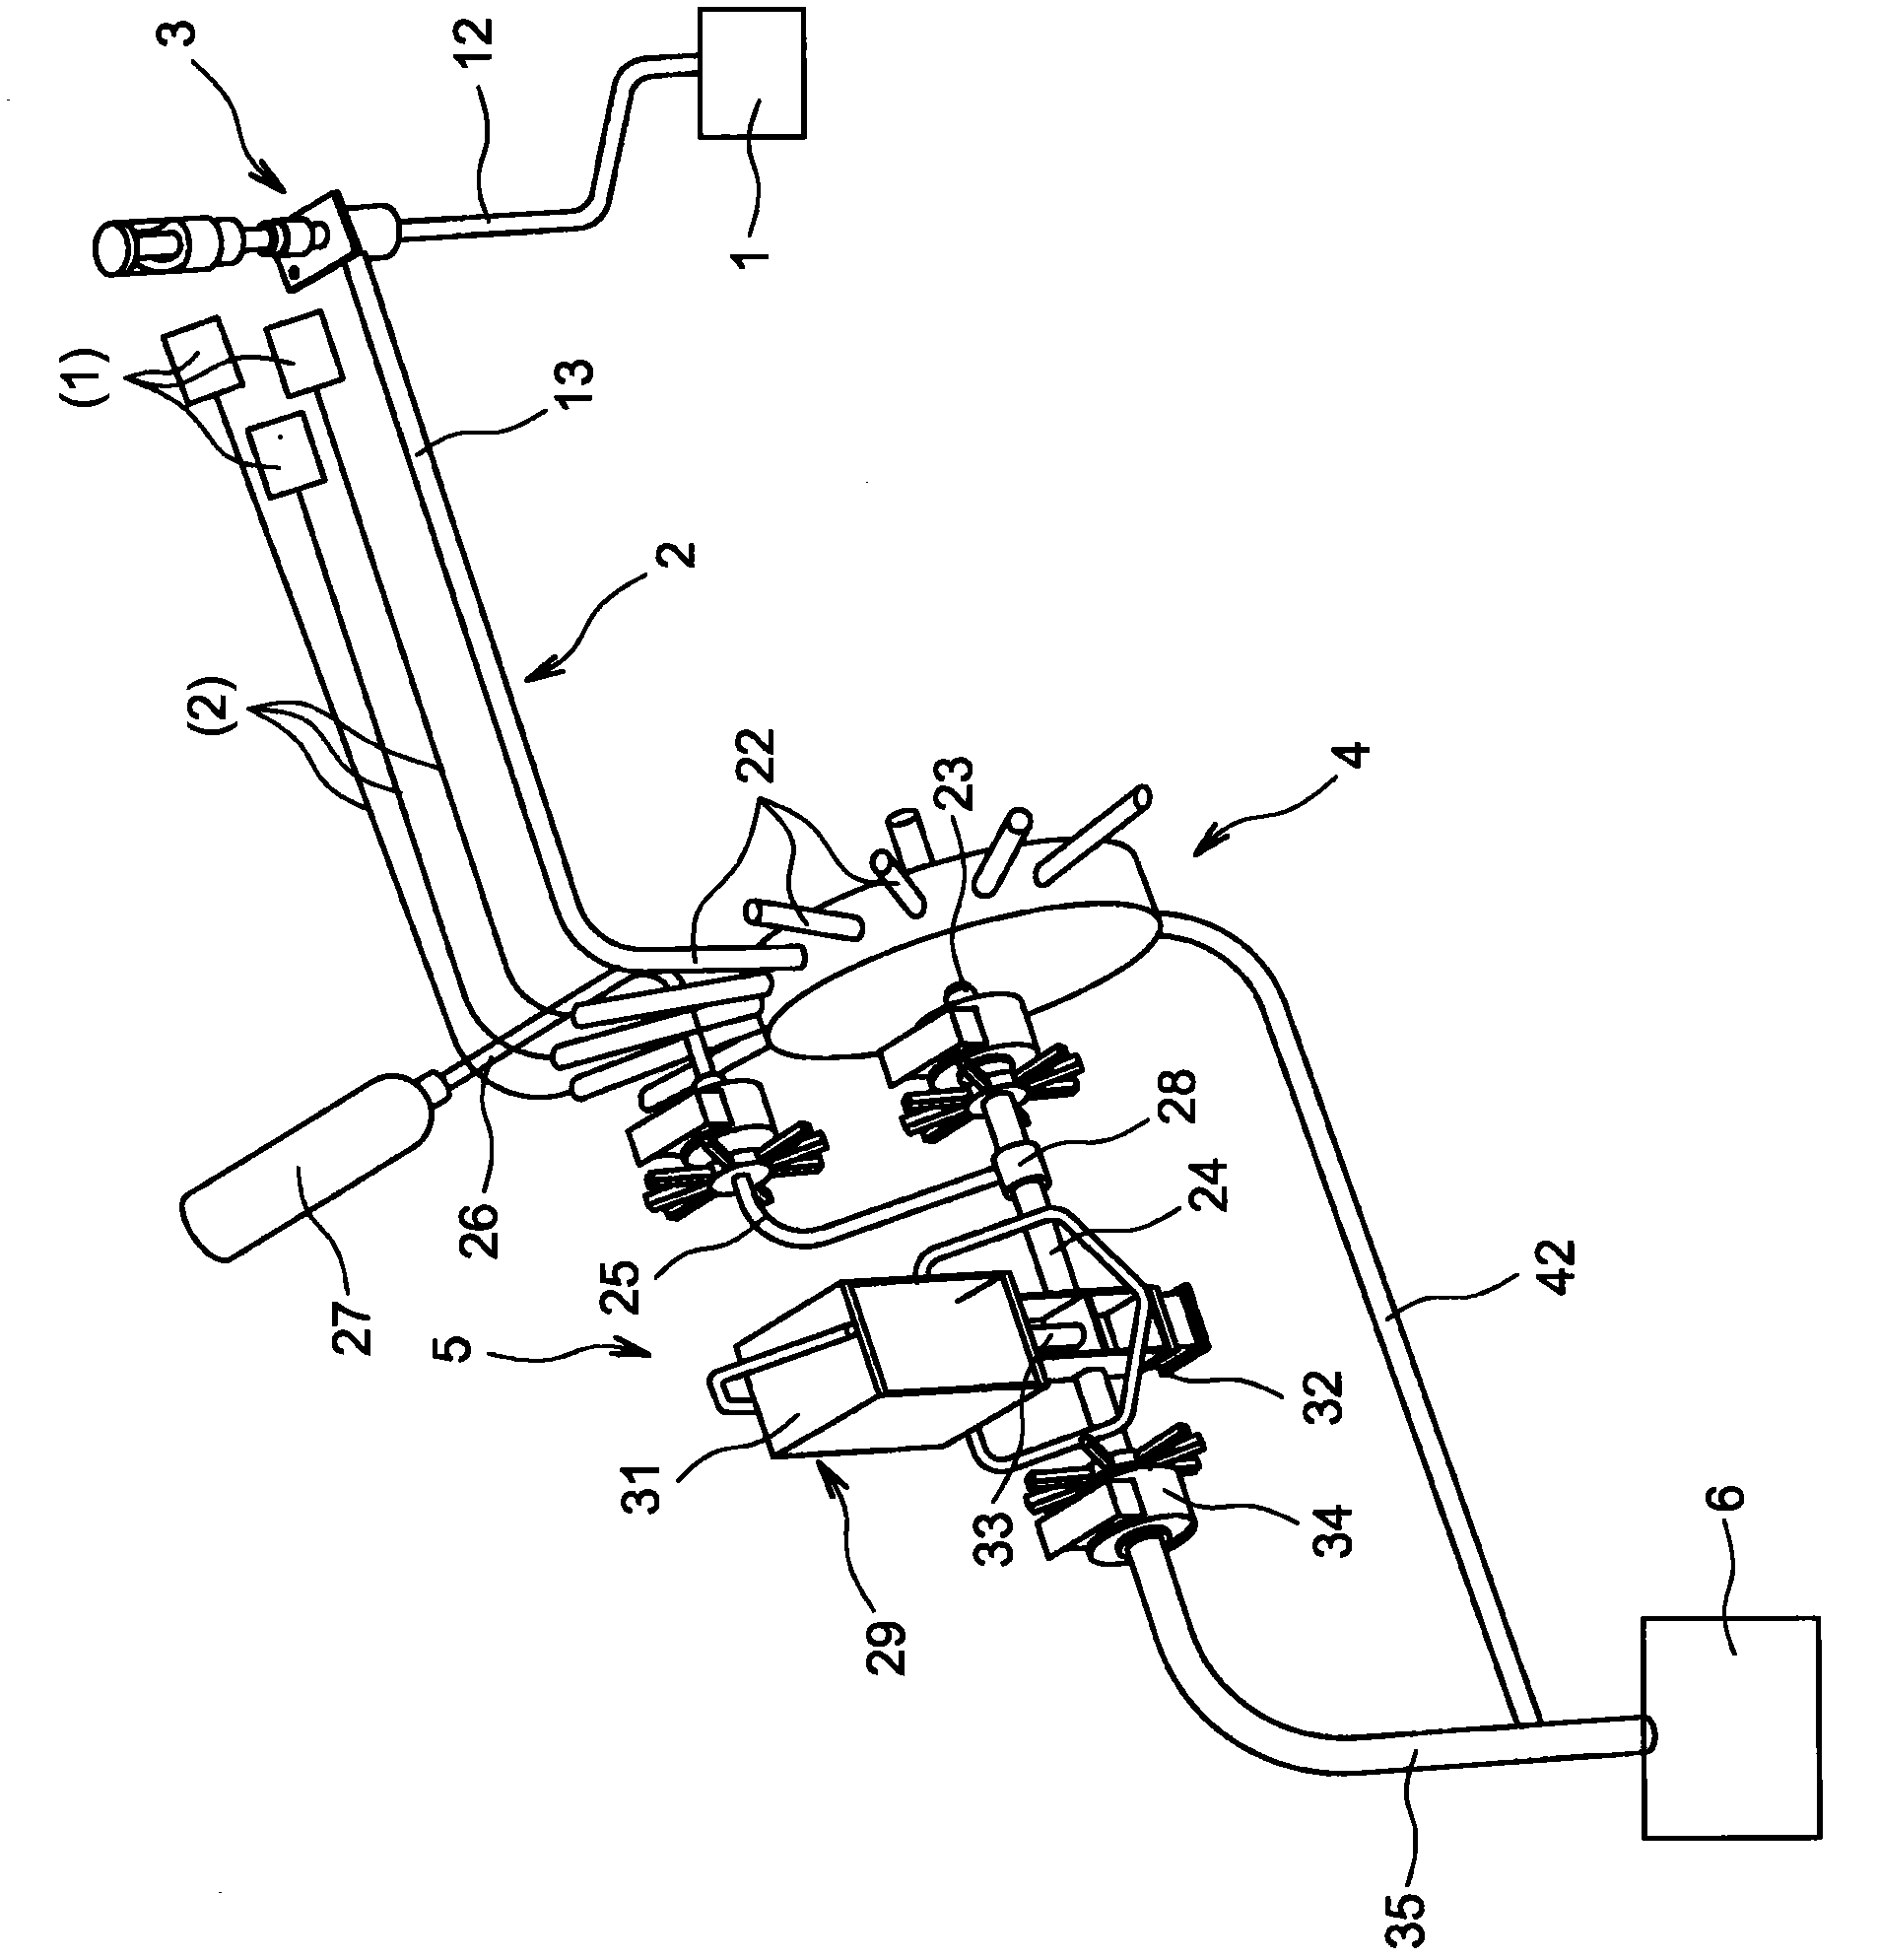 Device for collecting liquid samples from a vat